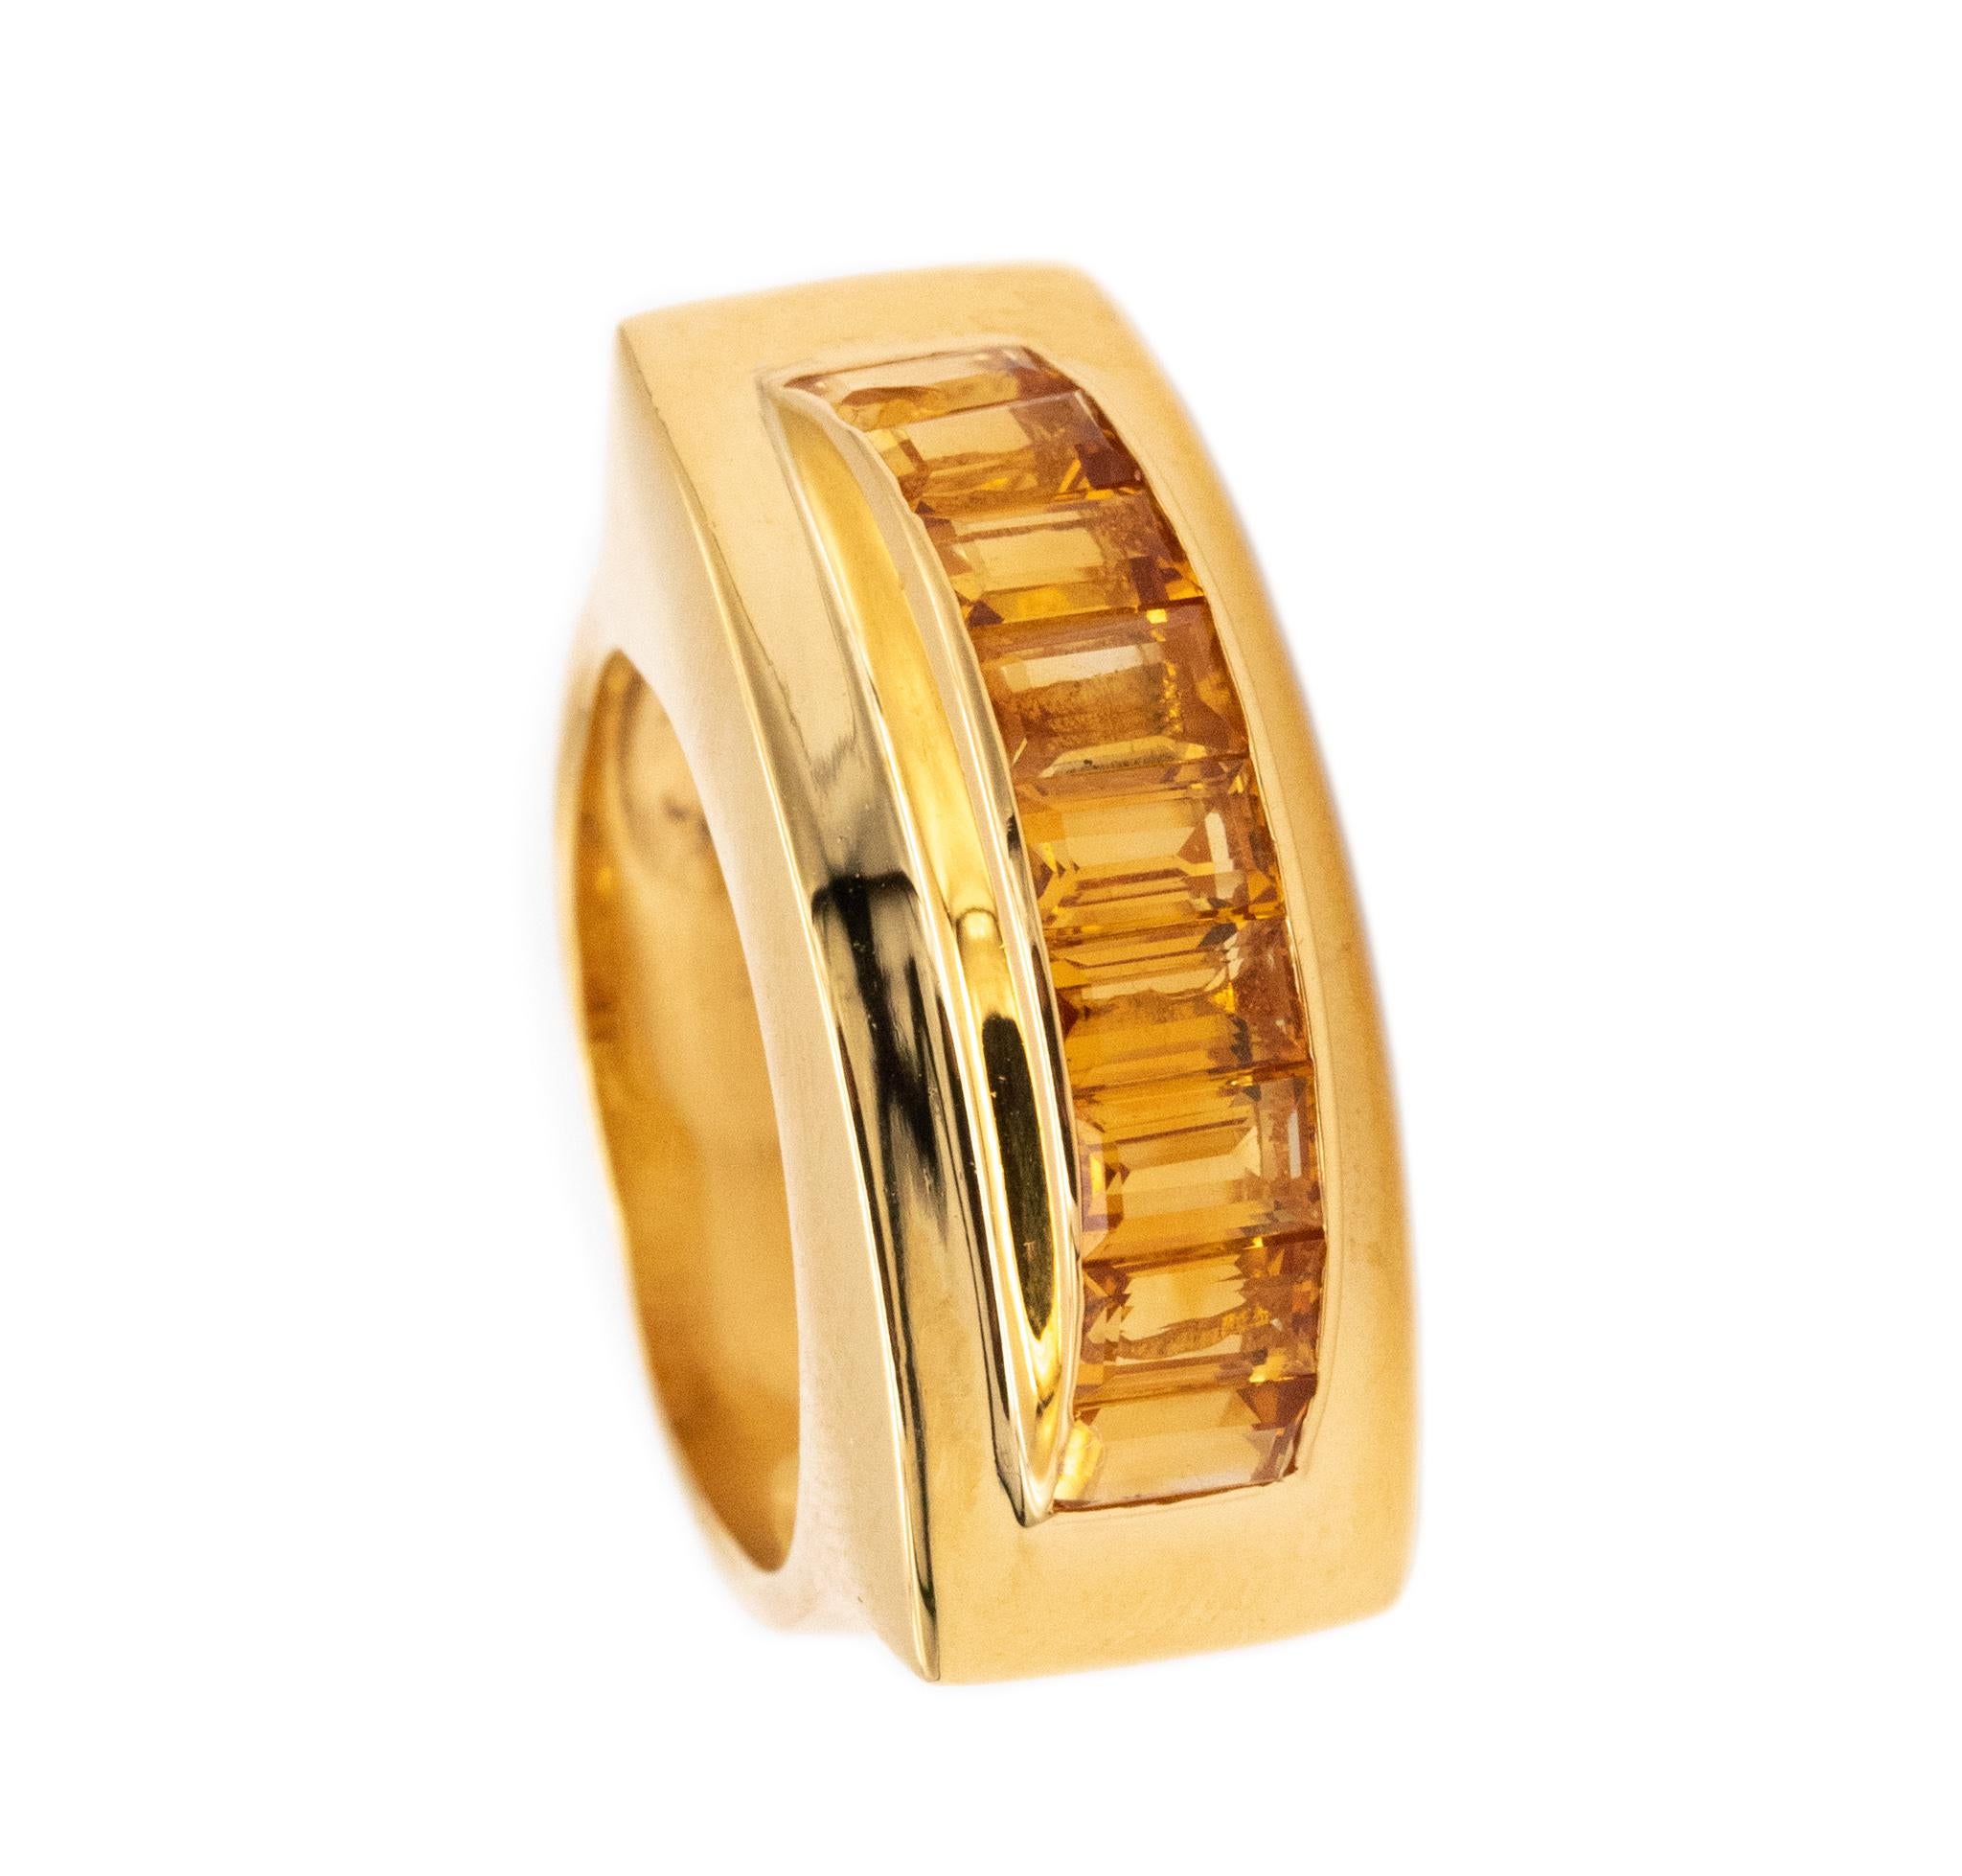 Art Deco 1940 American Geometric Tank Ring 18Kt Gold 4.5 Cts Caliber Citrines For Sale 4